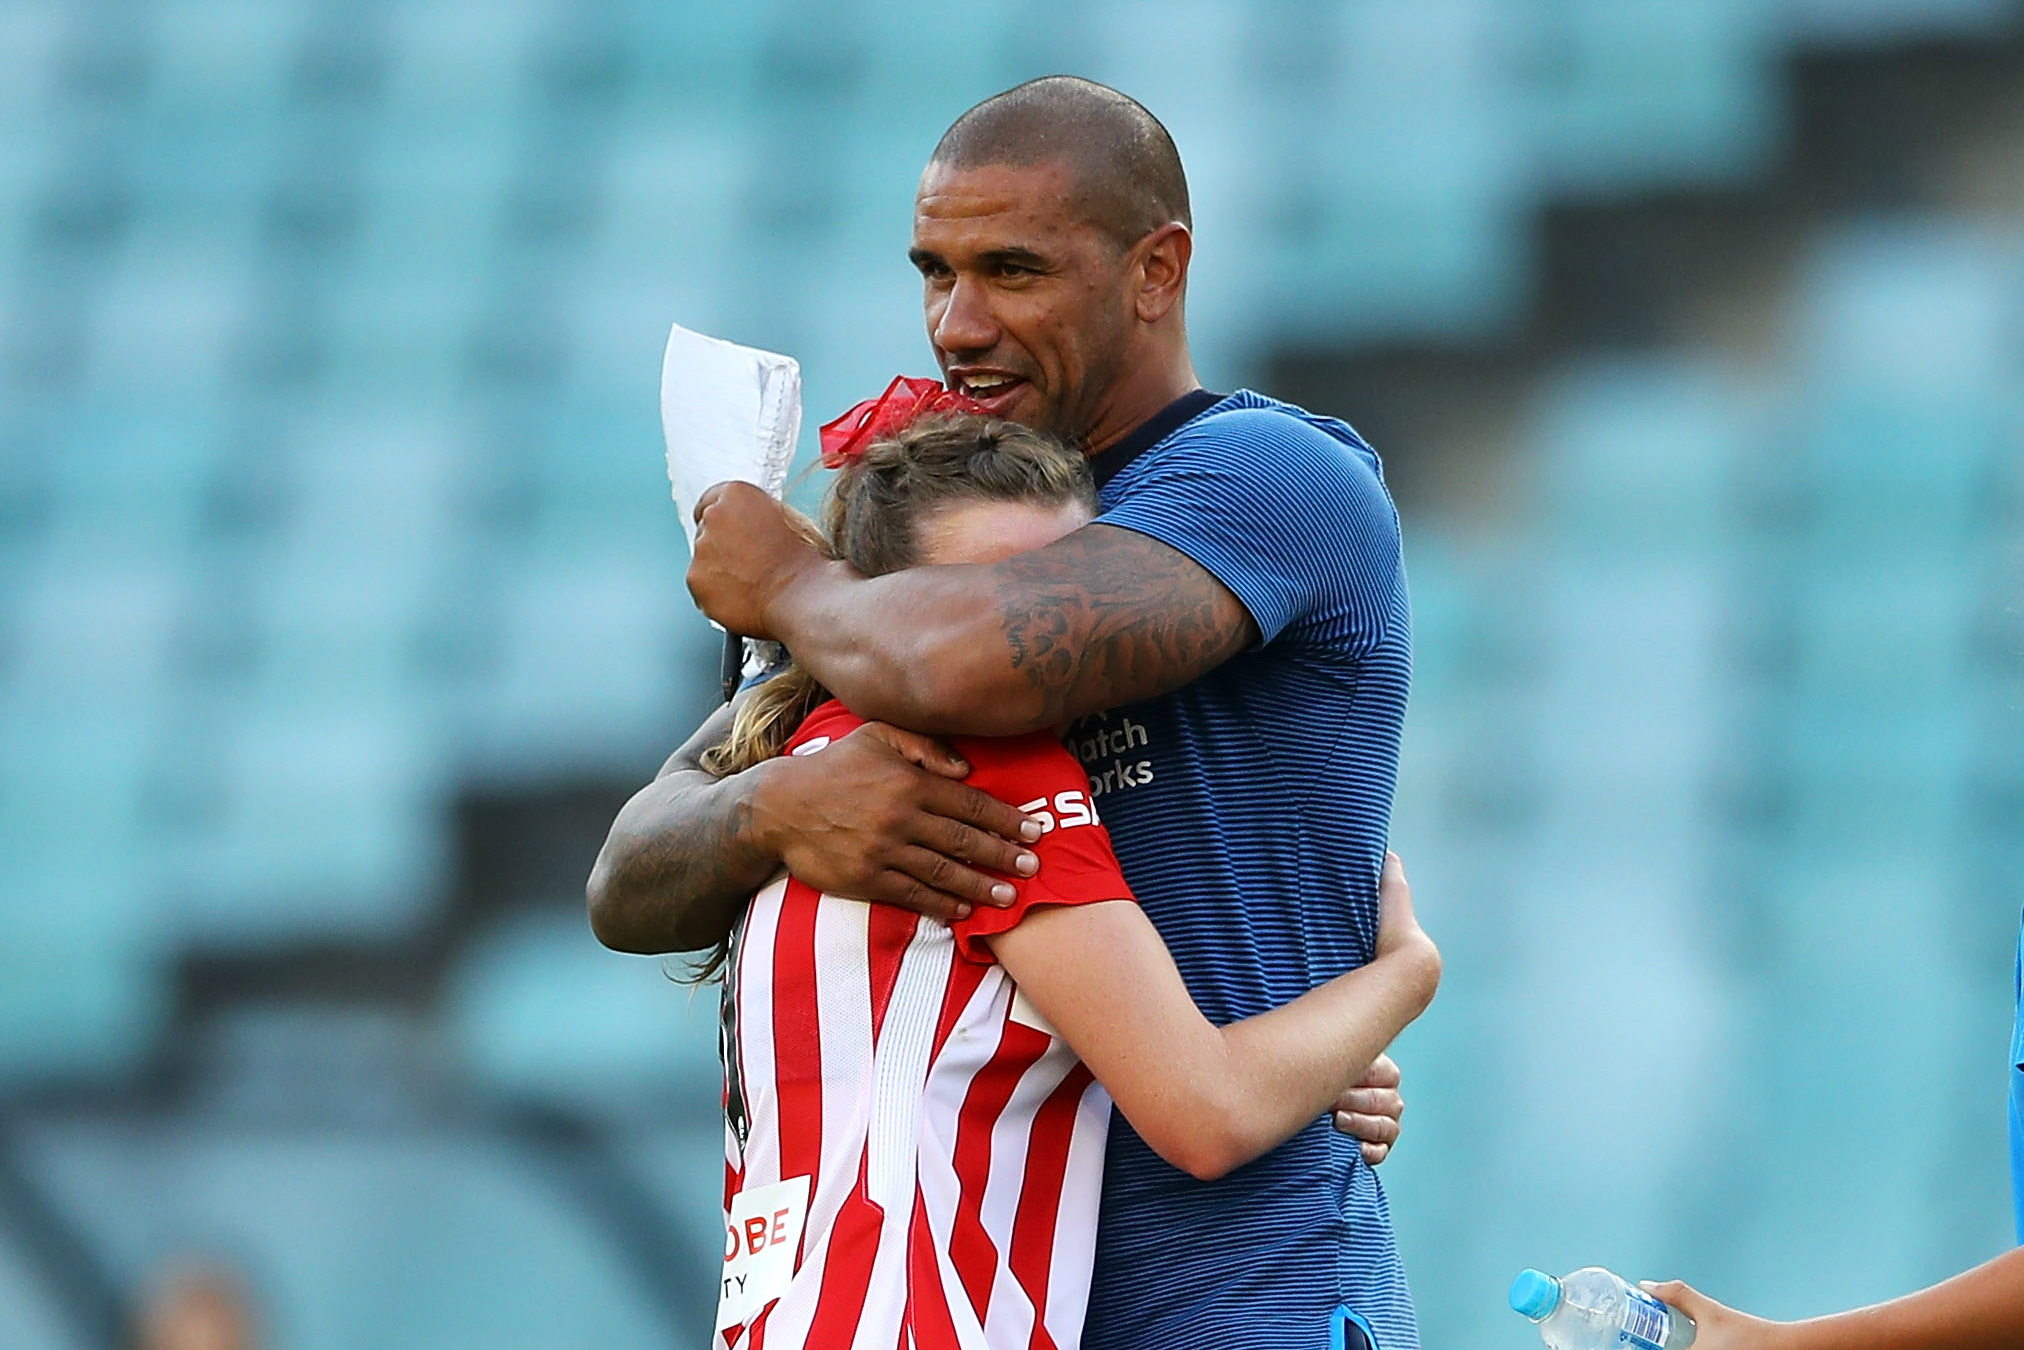 City boss Patrick Kisnorbo embraces one of his players after their Grand Final win.